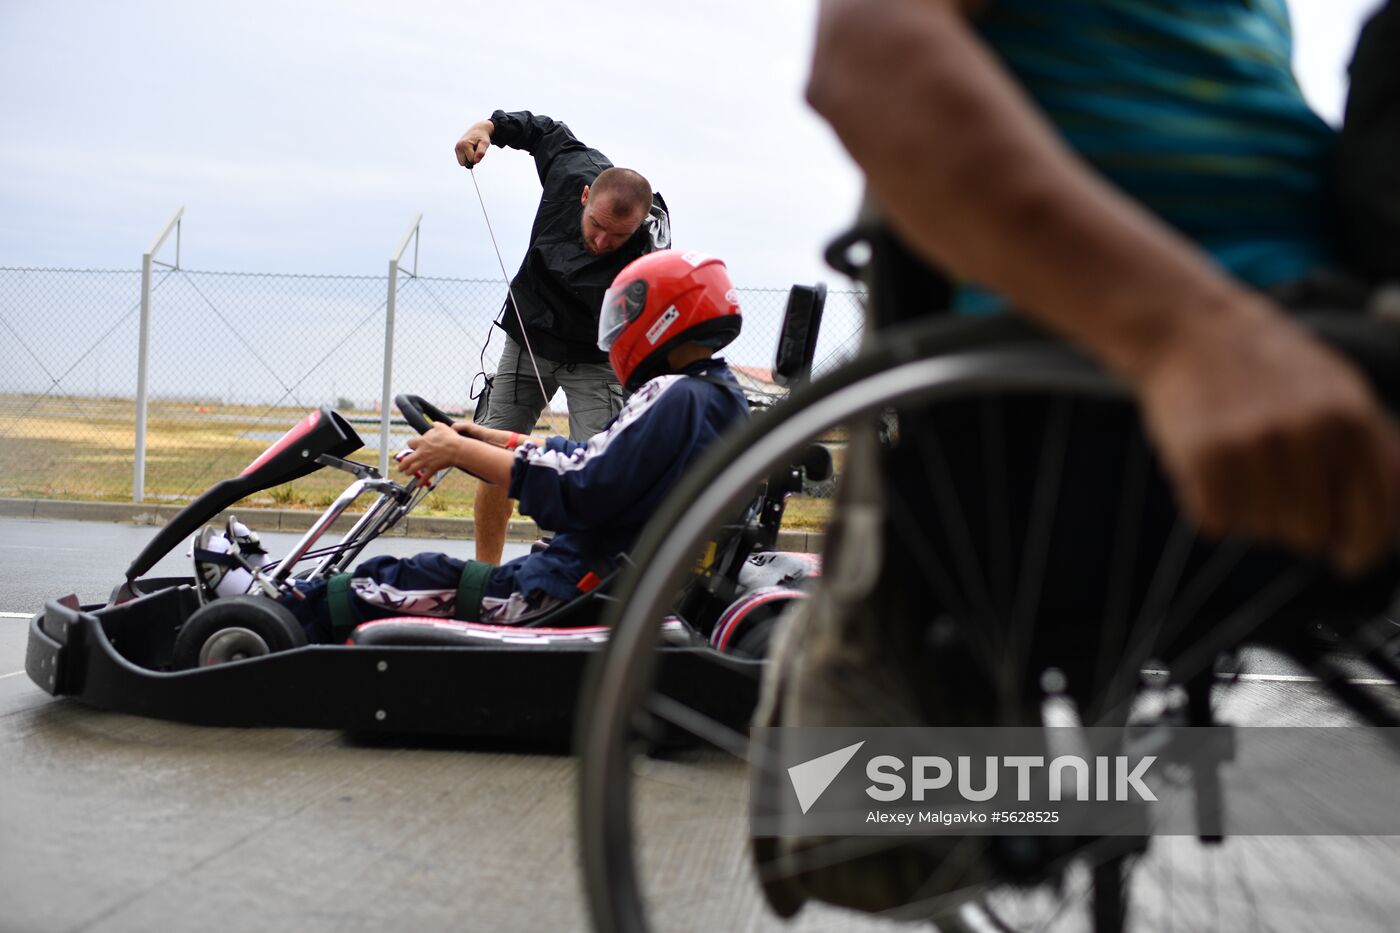 Russia Disabled Karting Race